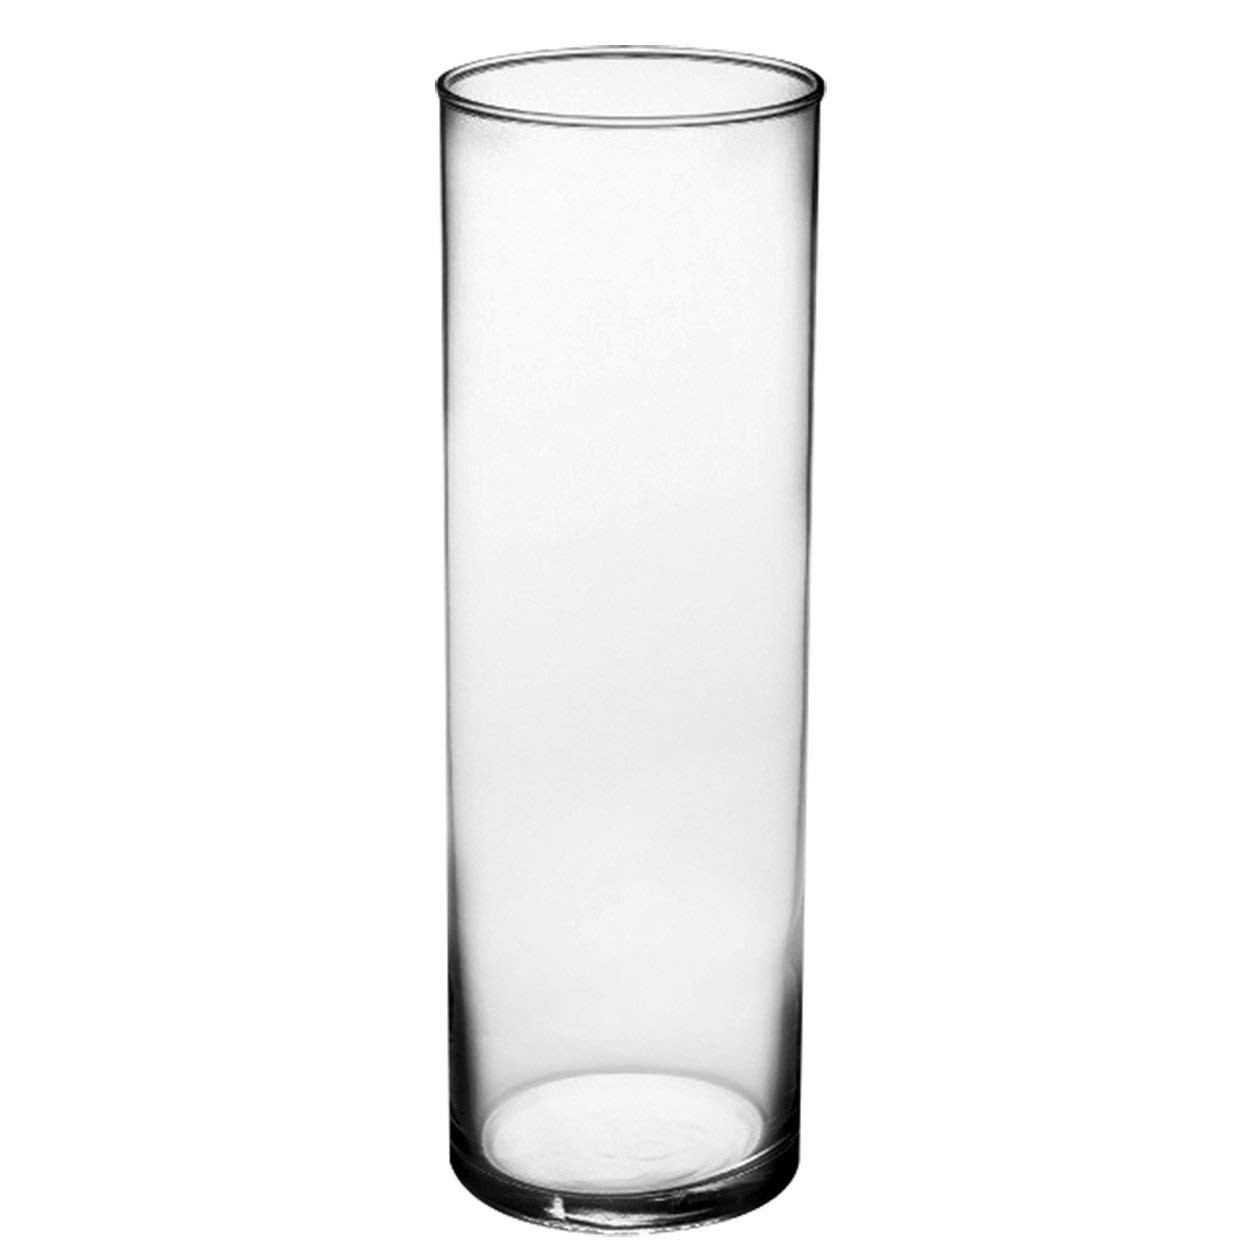 27 Great 20 Inch Glass Vase 2024 free download 20 inch glass vase of amazon com syndicate sales 3 1 2 x 10 1 2 cylinder vase clear within amazon com syndicate sales 3 1 2 x 10 1 2 cylinder vase clear planters garden outdoor